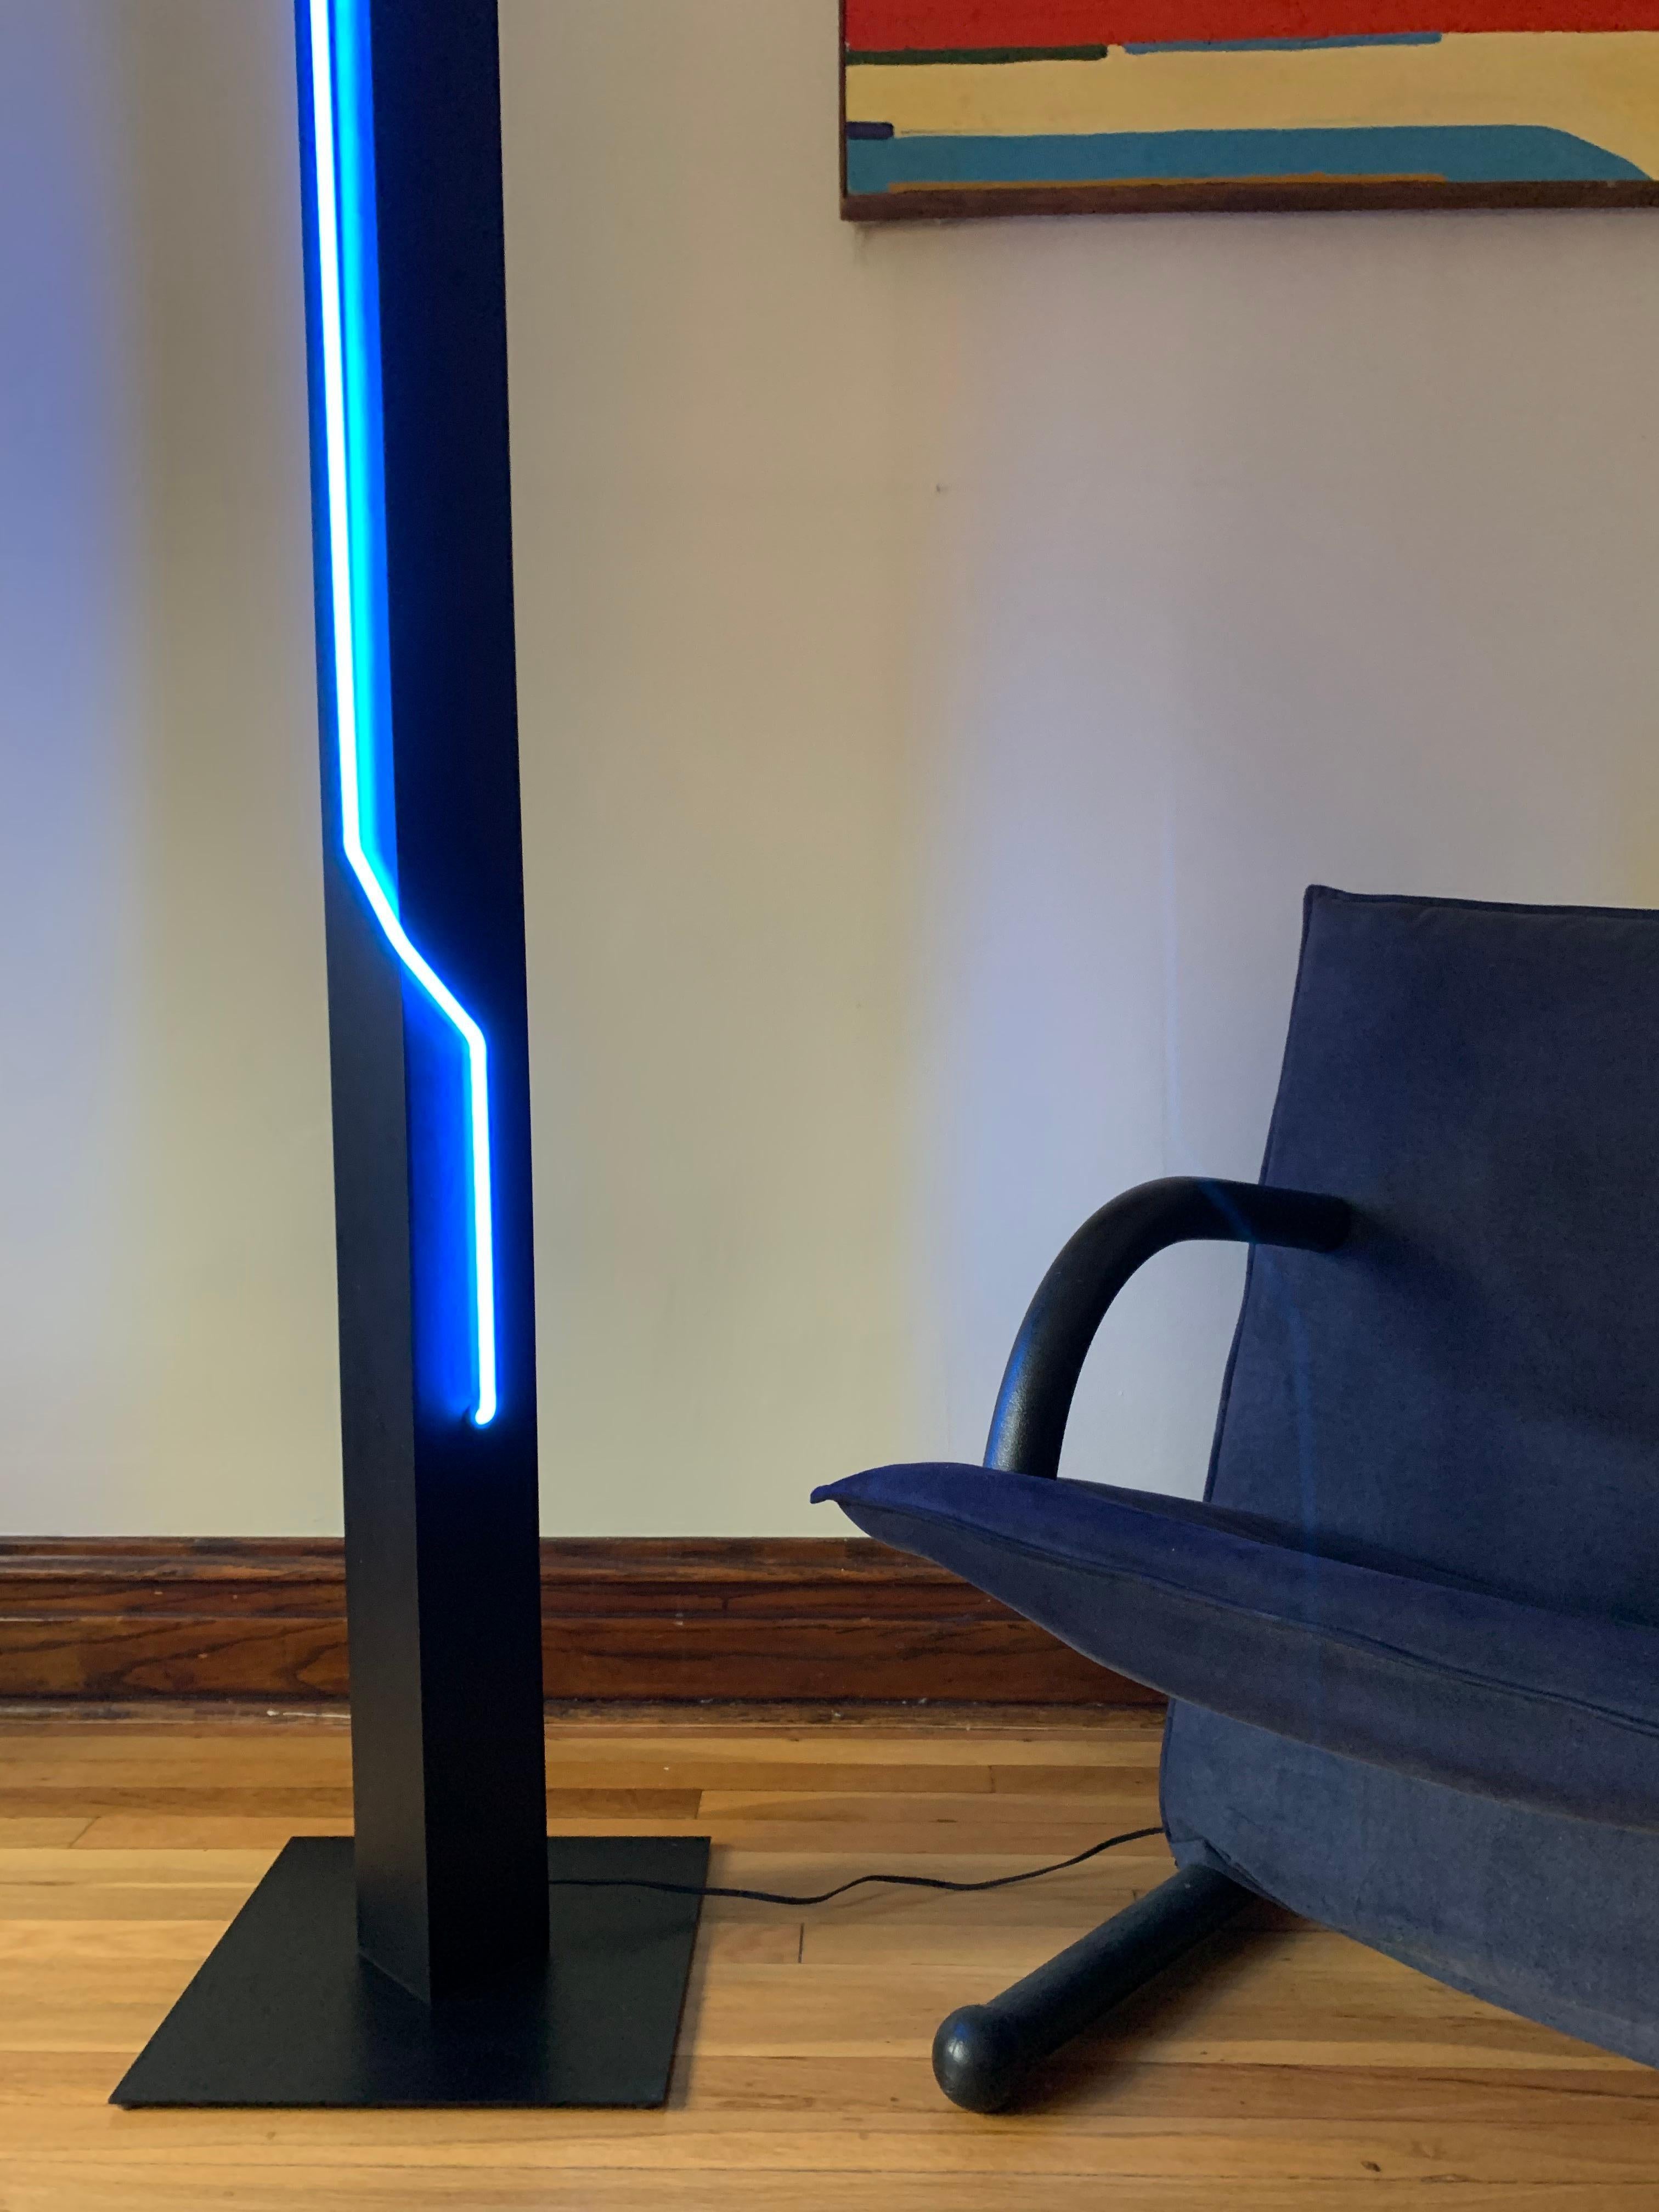 A true statement. Sculptural, monolithic halogen torchiere with a blue neon element designed by Dan Chelsea of Let There Be Neon, founded by Rudi Stern, in collaboration with George Kovacs. A total must have for any fan of the eclectic and